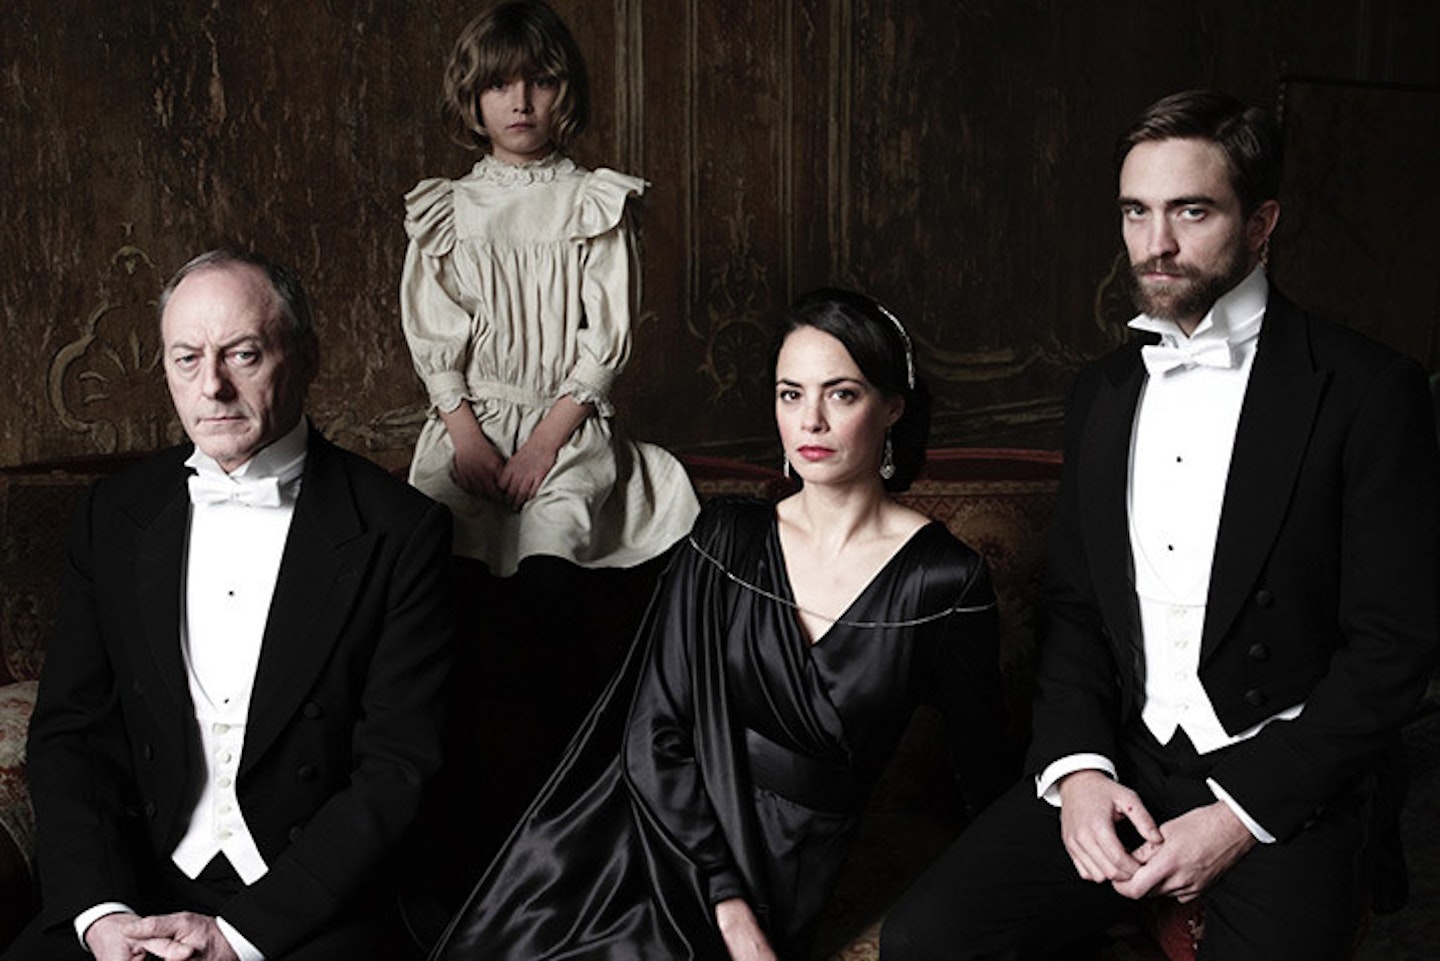 The cast of The Childhood Of A Leader